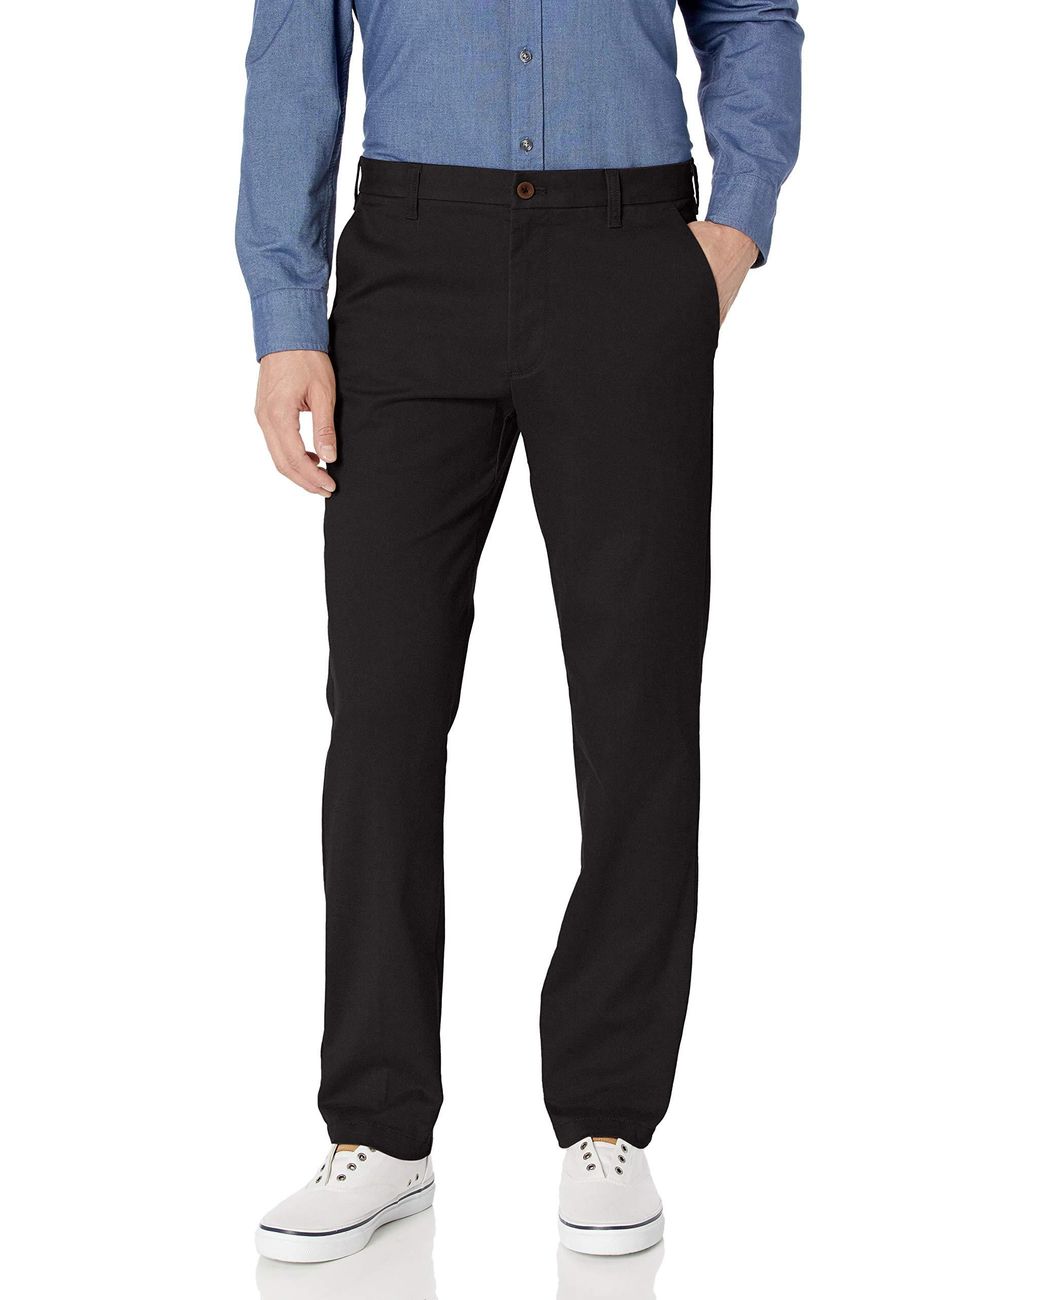 Izod Performance Stretch Straight Fit Flat Front Chino Pant in Black ...